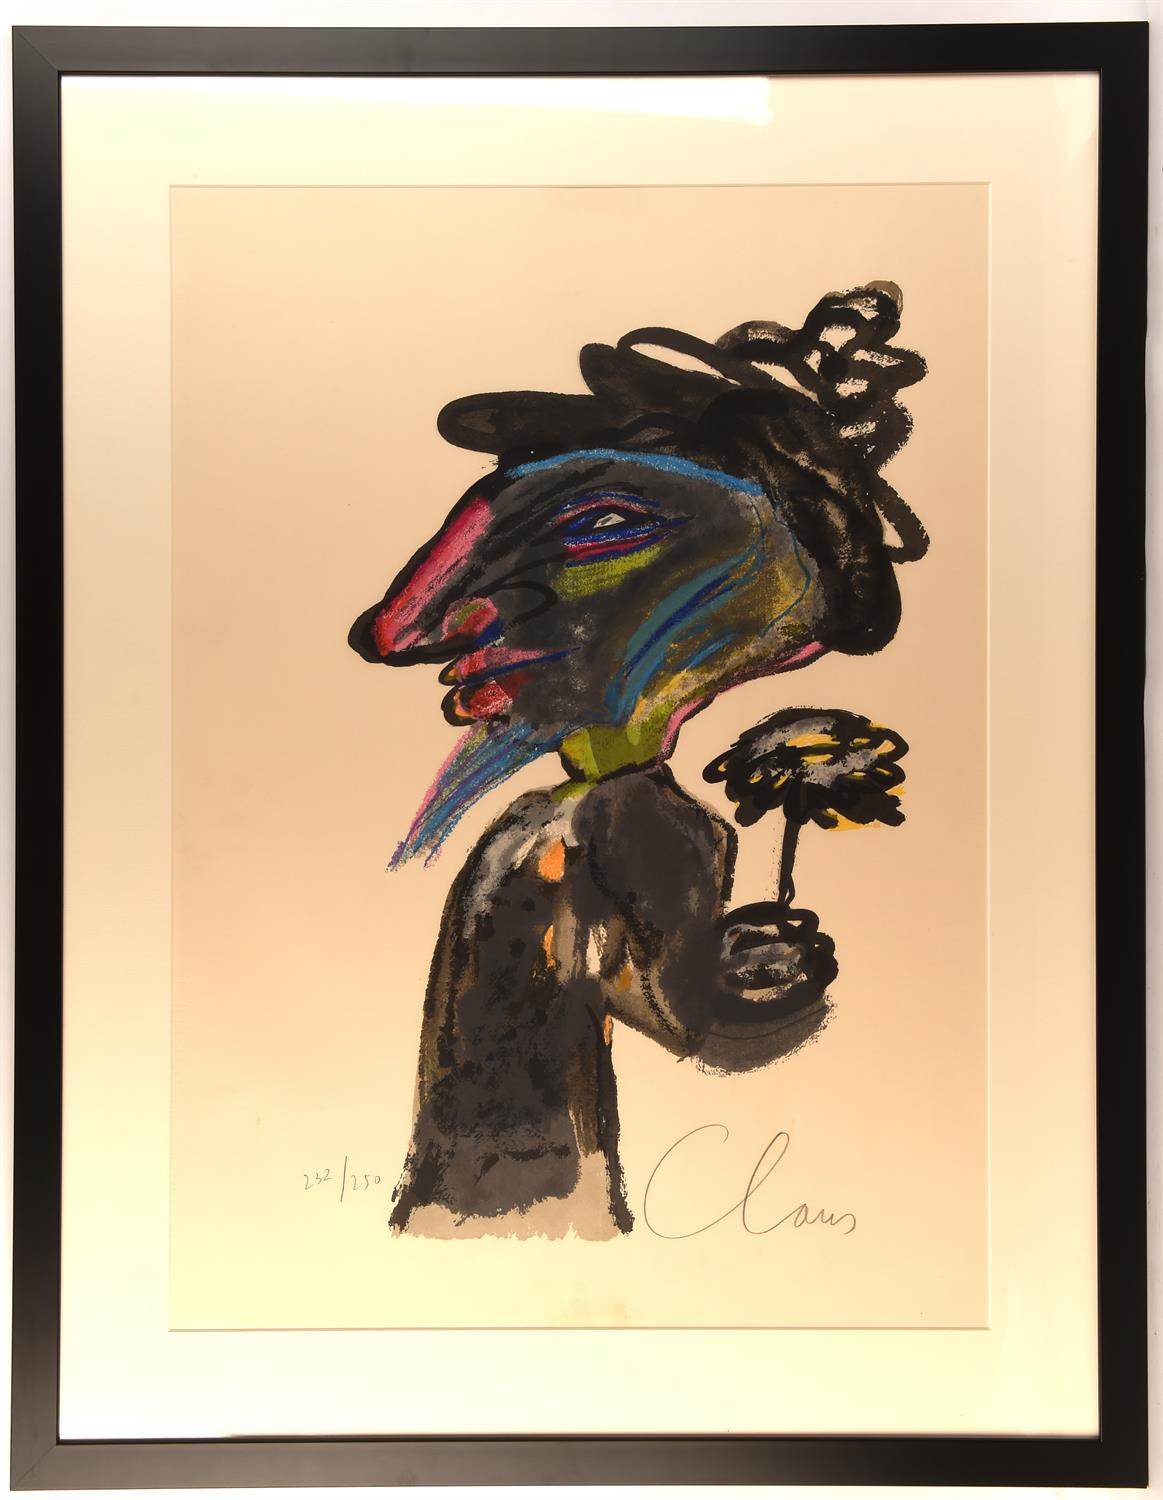 Hugo Claus (1929 – 2008) 'Clown', colour lithograph, signed lower right and numbered 232/250 lower - Image 2 of 3